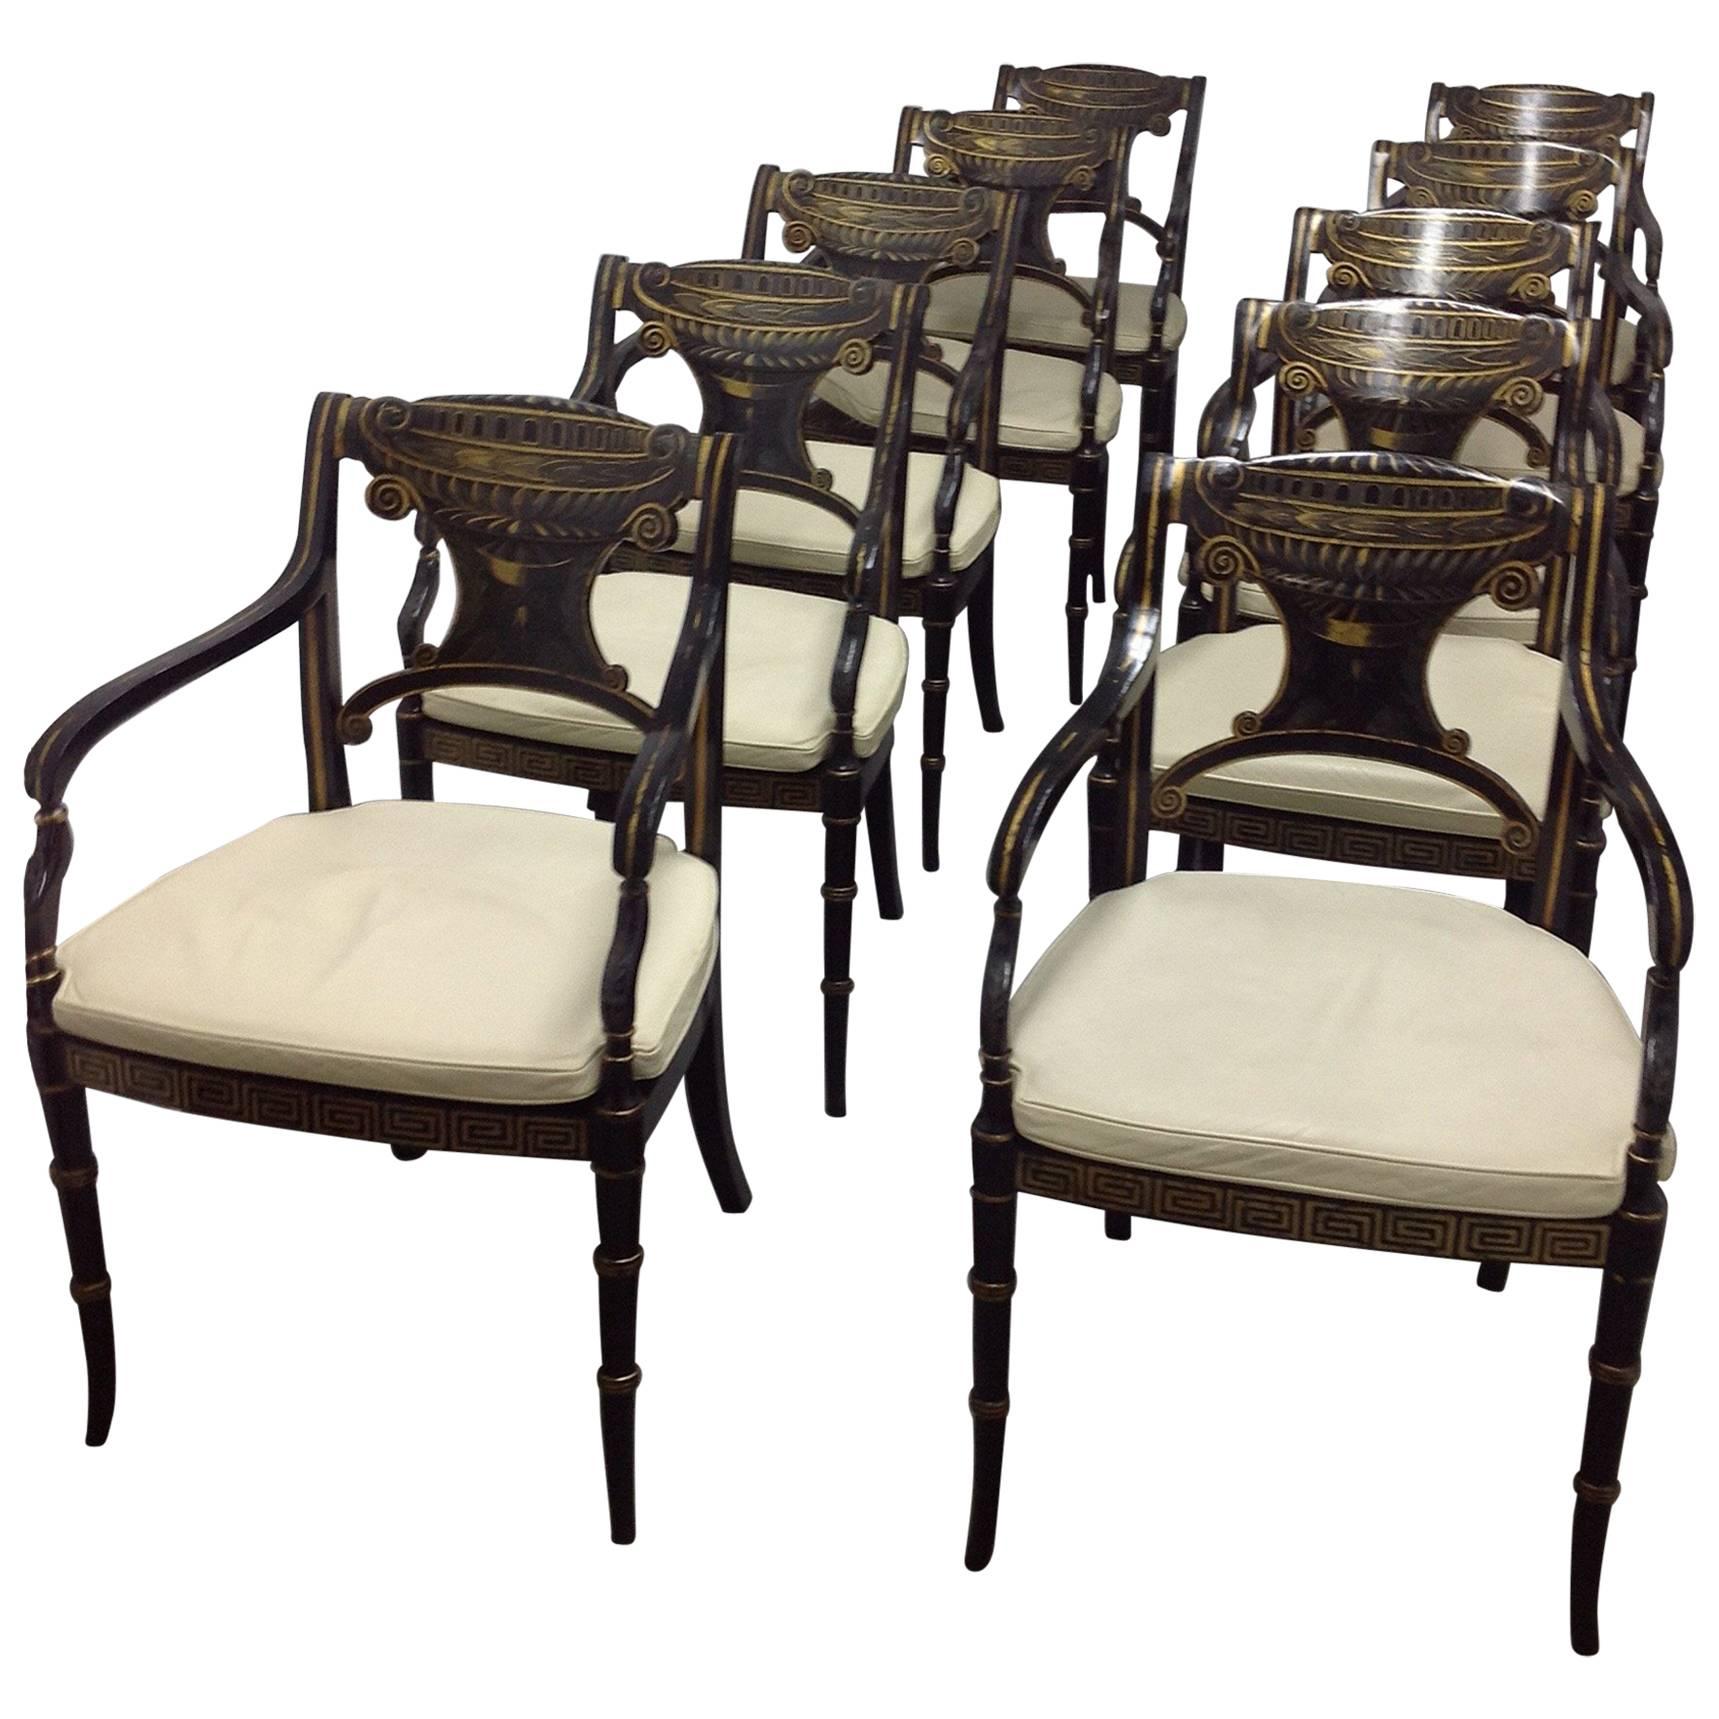 Set of Ten Regency Style Parcel-Gilt Black Painted Caned Armchairs